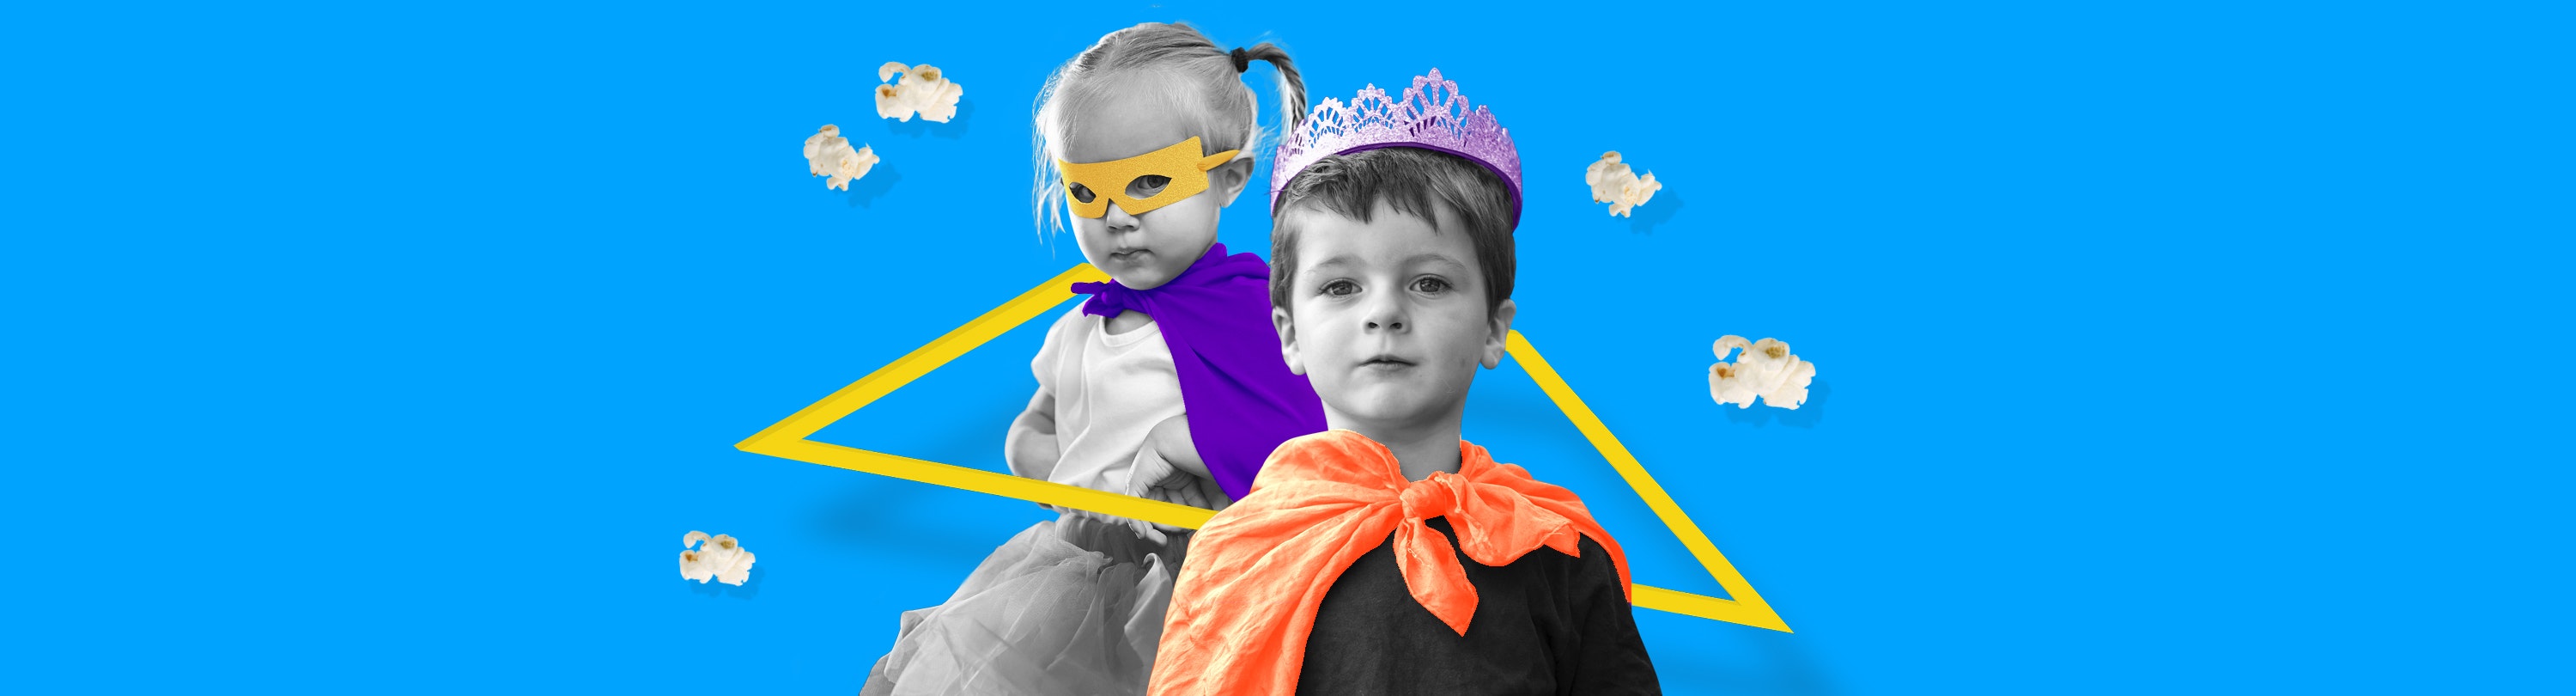 Fed Kidz dress up competition banner